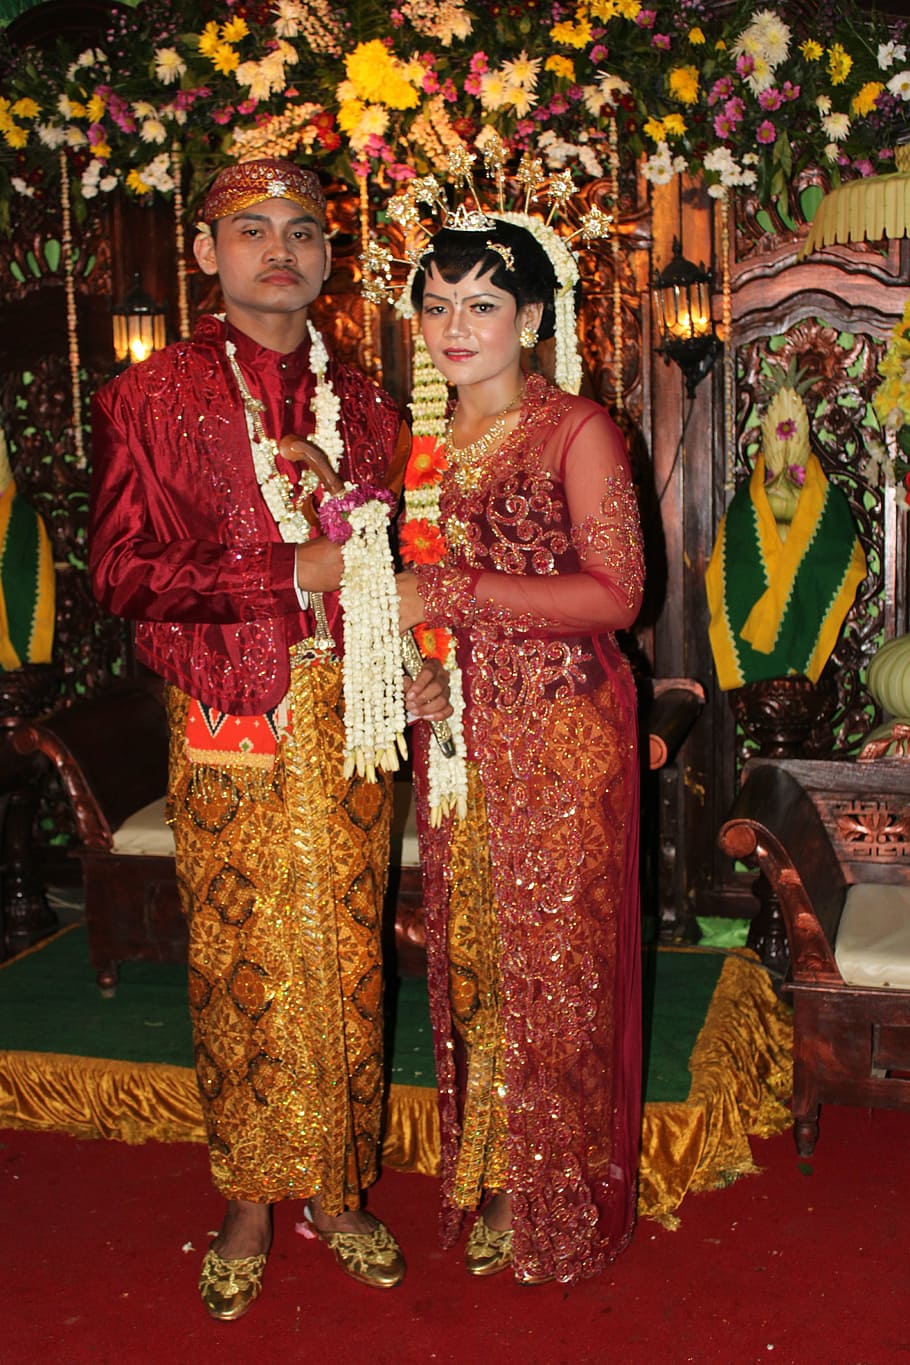 wedding, traditional javanese, tradition, batik, culture, clothing, young adult, young women, indoors, women